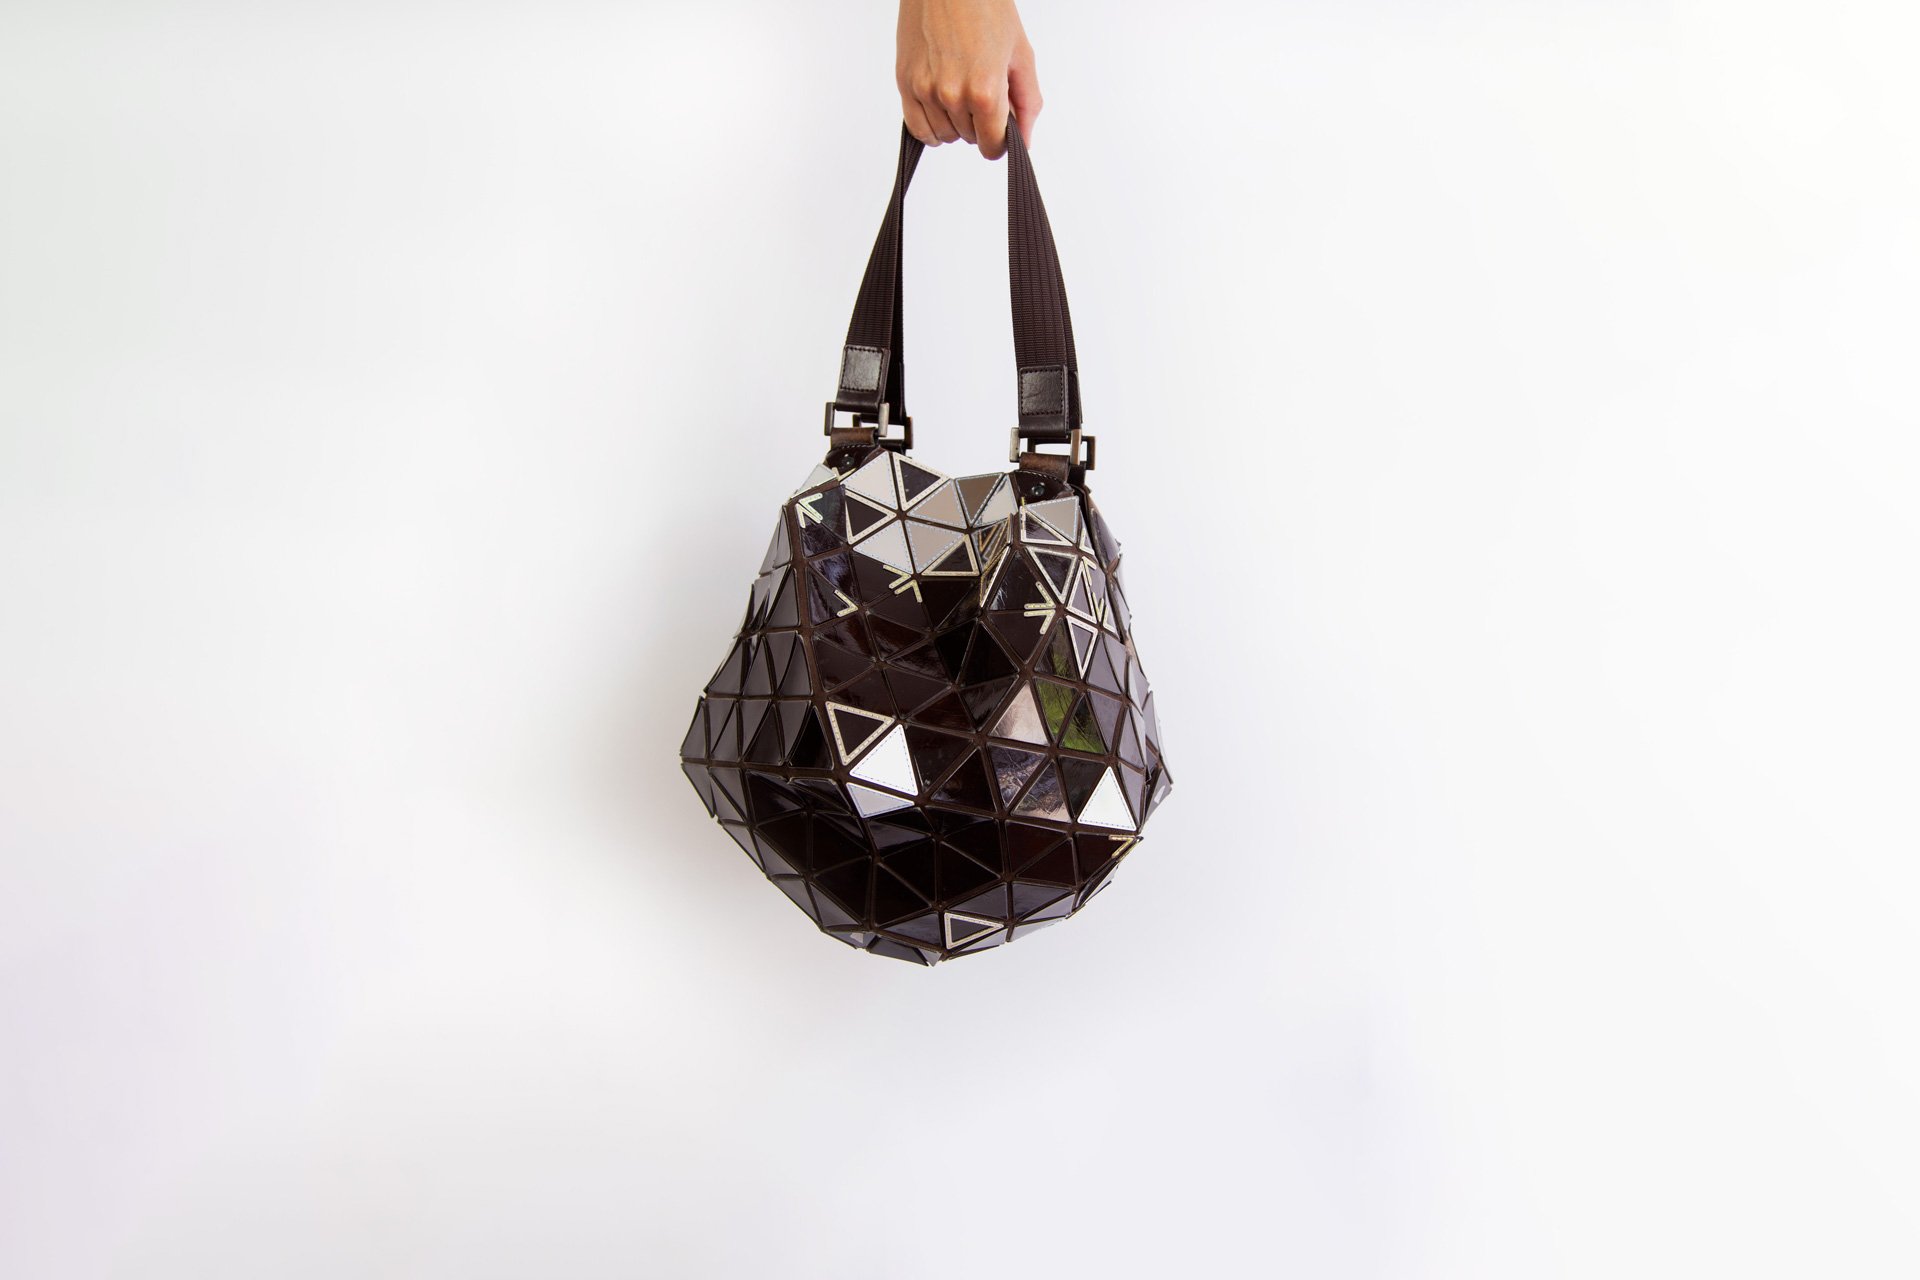 Bao Bao Issey Miyake Lucent Tote | Nordstrom